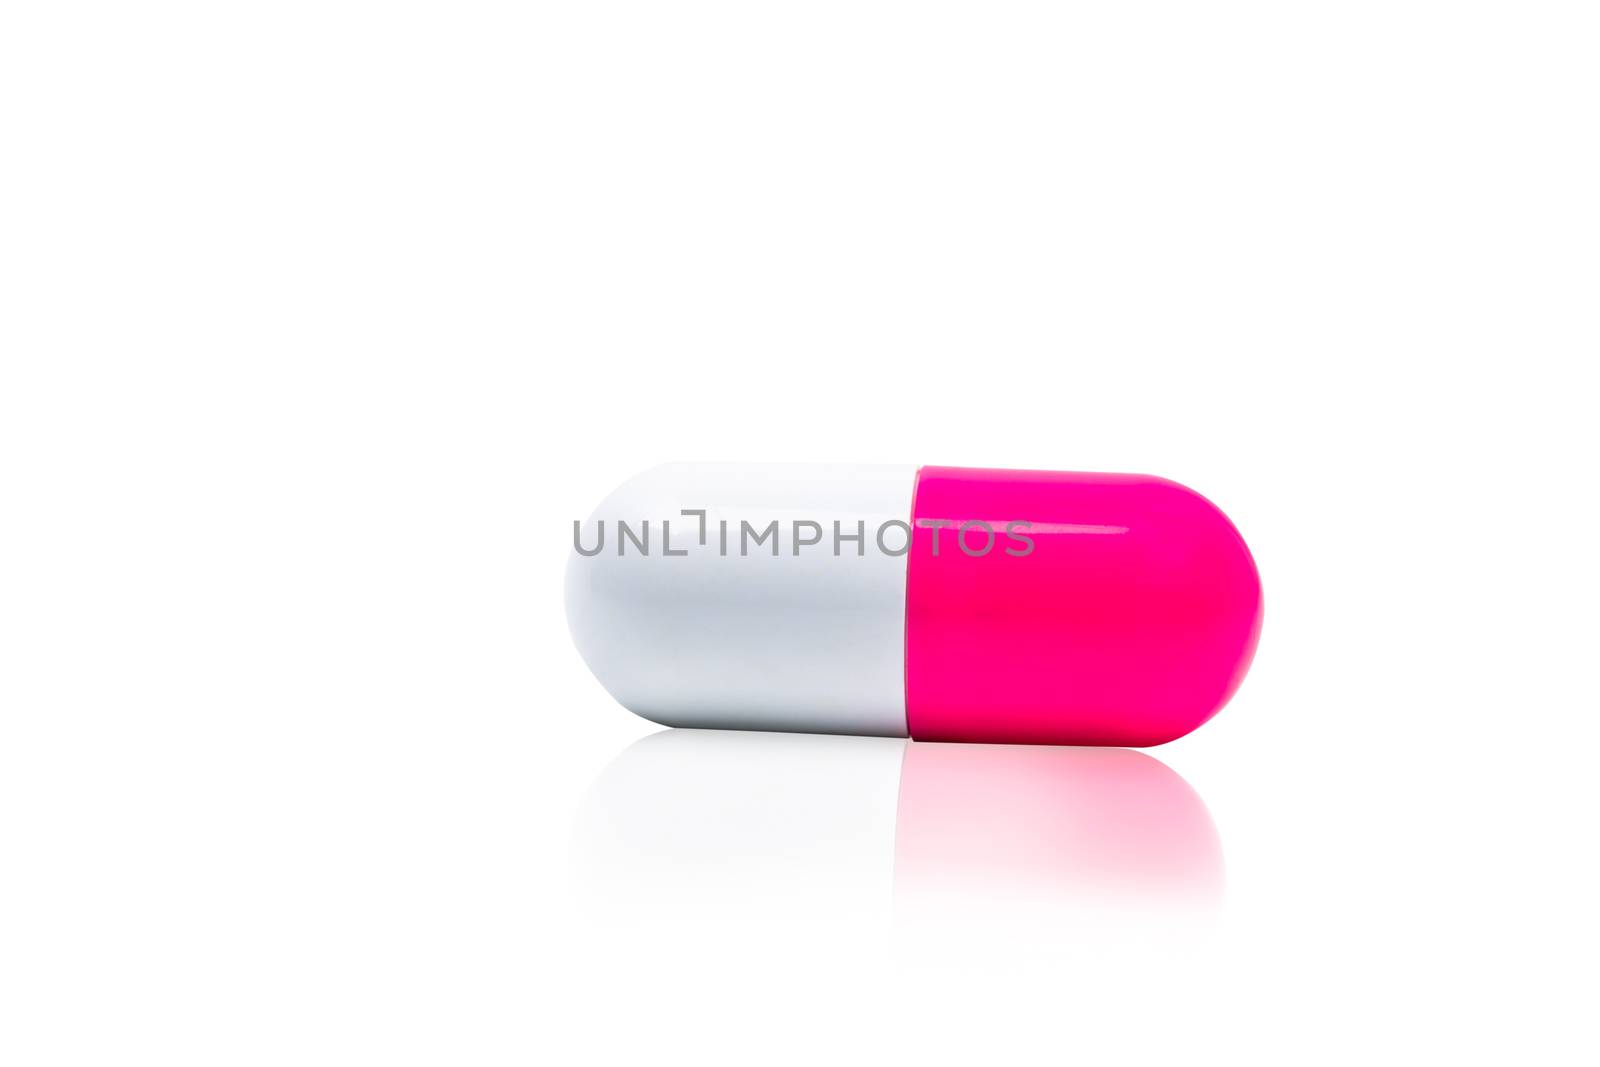 Pink, white capsule pills isolated on white background with shadow and copy space for text. Drug resistance concept. Antibiotics drug use with reasonable and global healthcare concept. Pharmacy sign and symbol. Pharmaceutical industry. Pharmacy background. Antibiotic or antimicrobial drug resistance. Health budgets and policy. by Fahroni